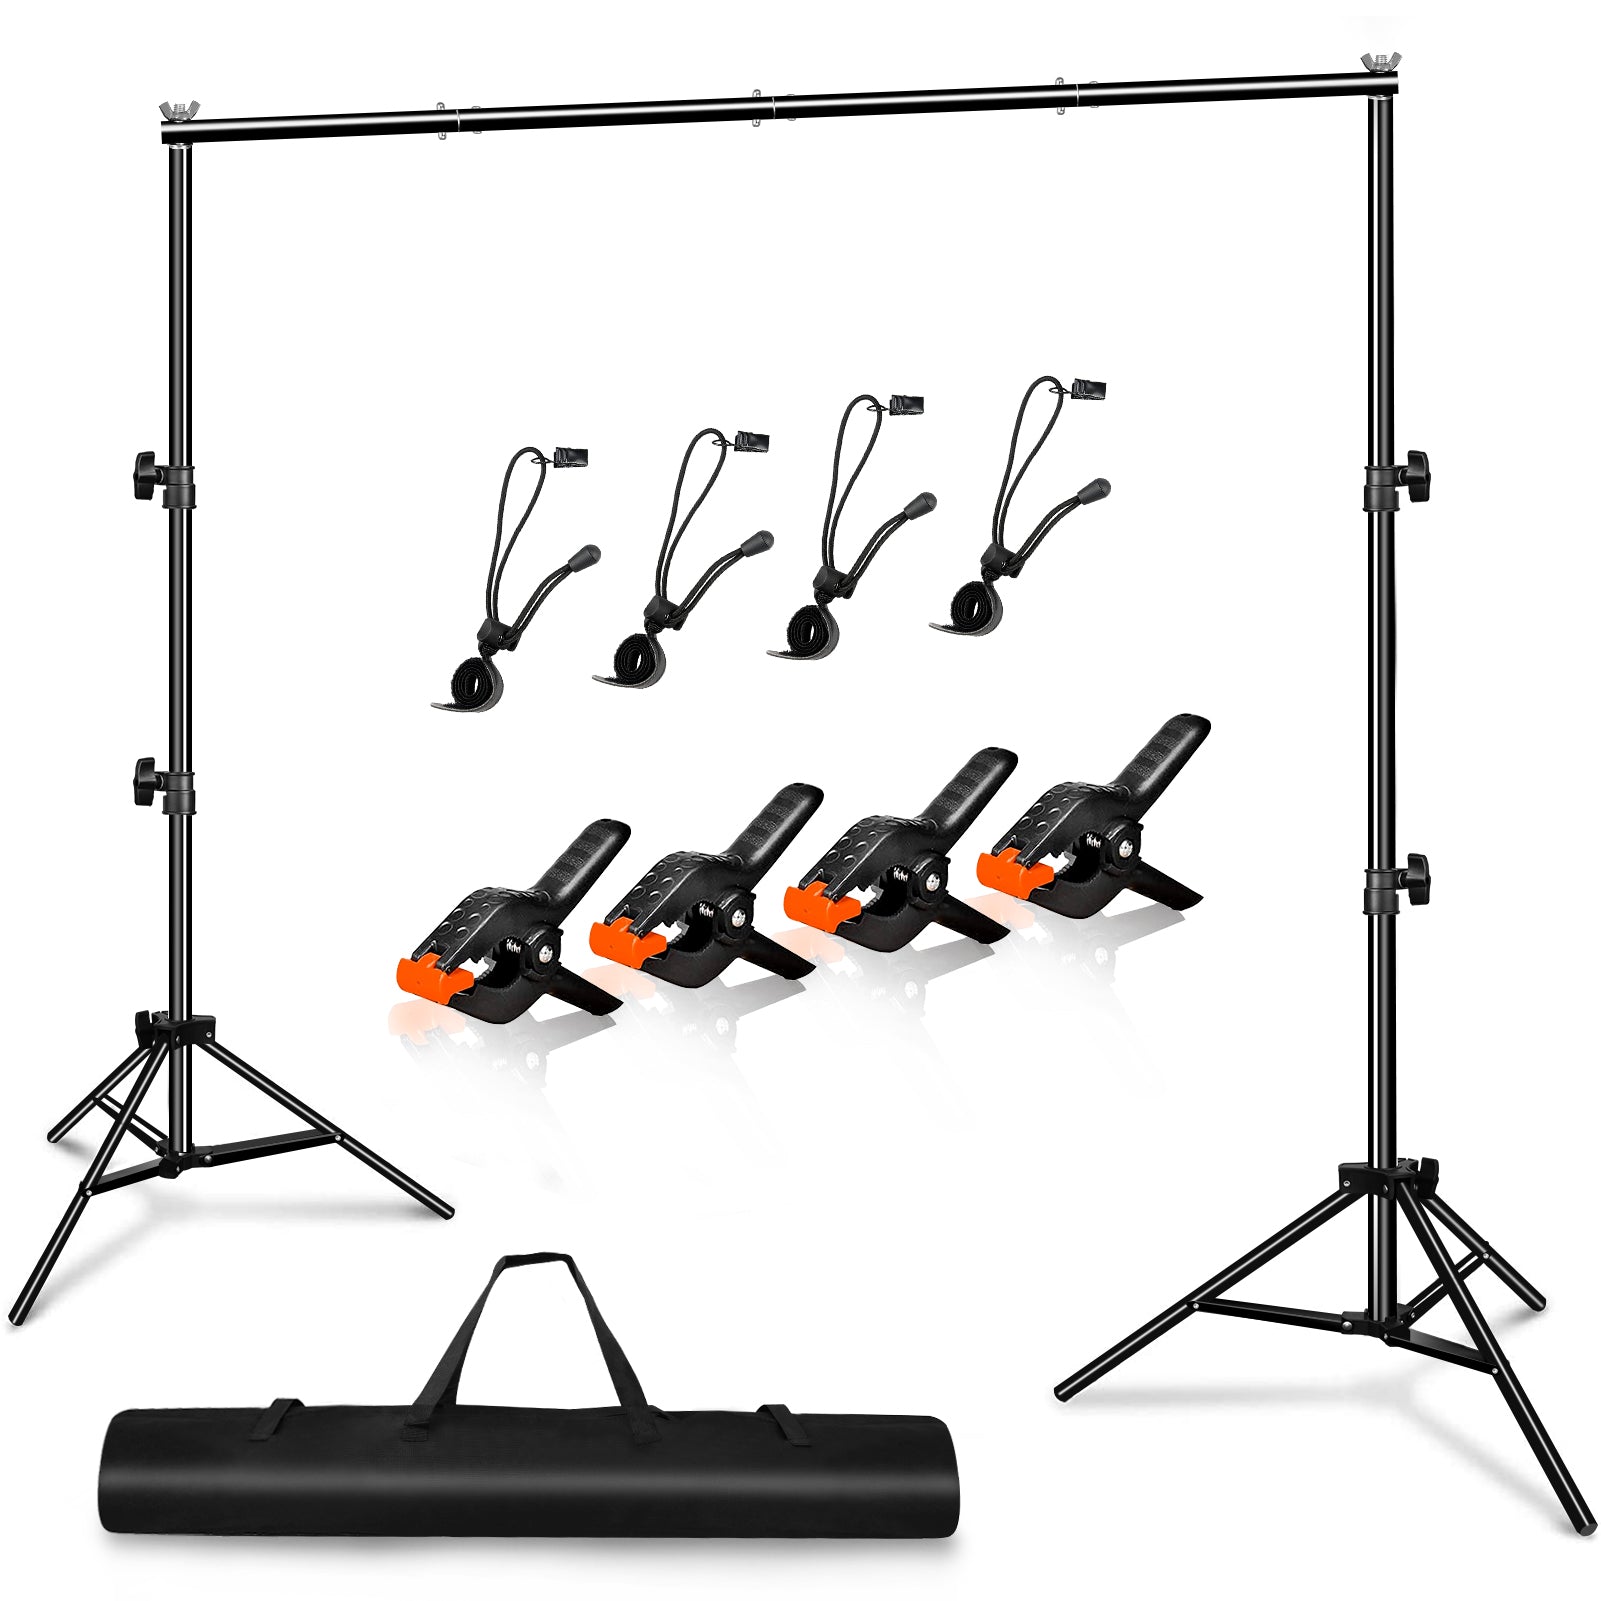 Heysliy Photography Backdrop Stand Kit, 2 x 3M(6.5 x 9.8FT) Green Scre